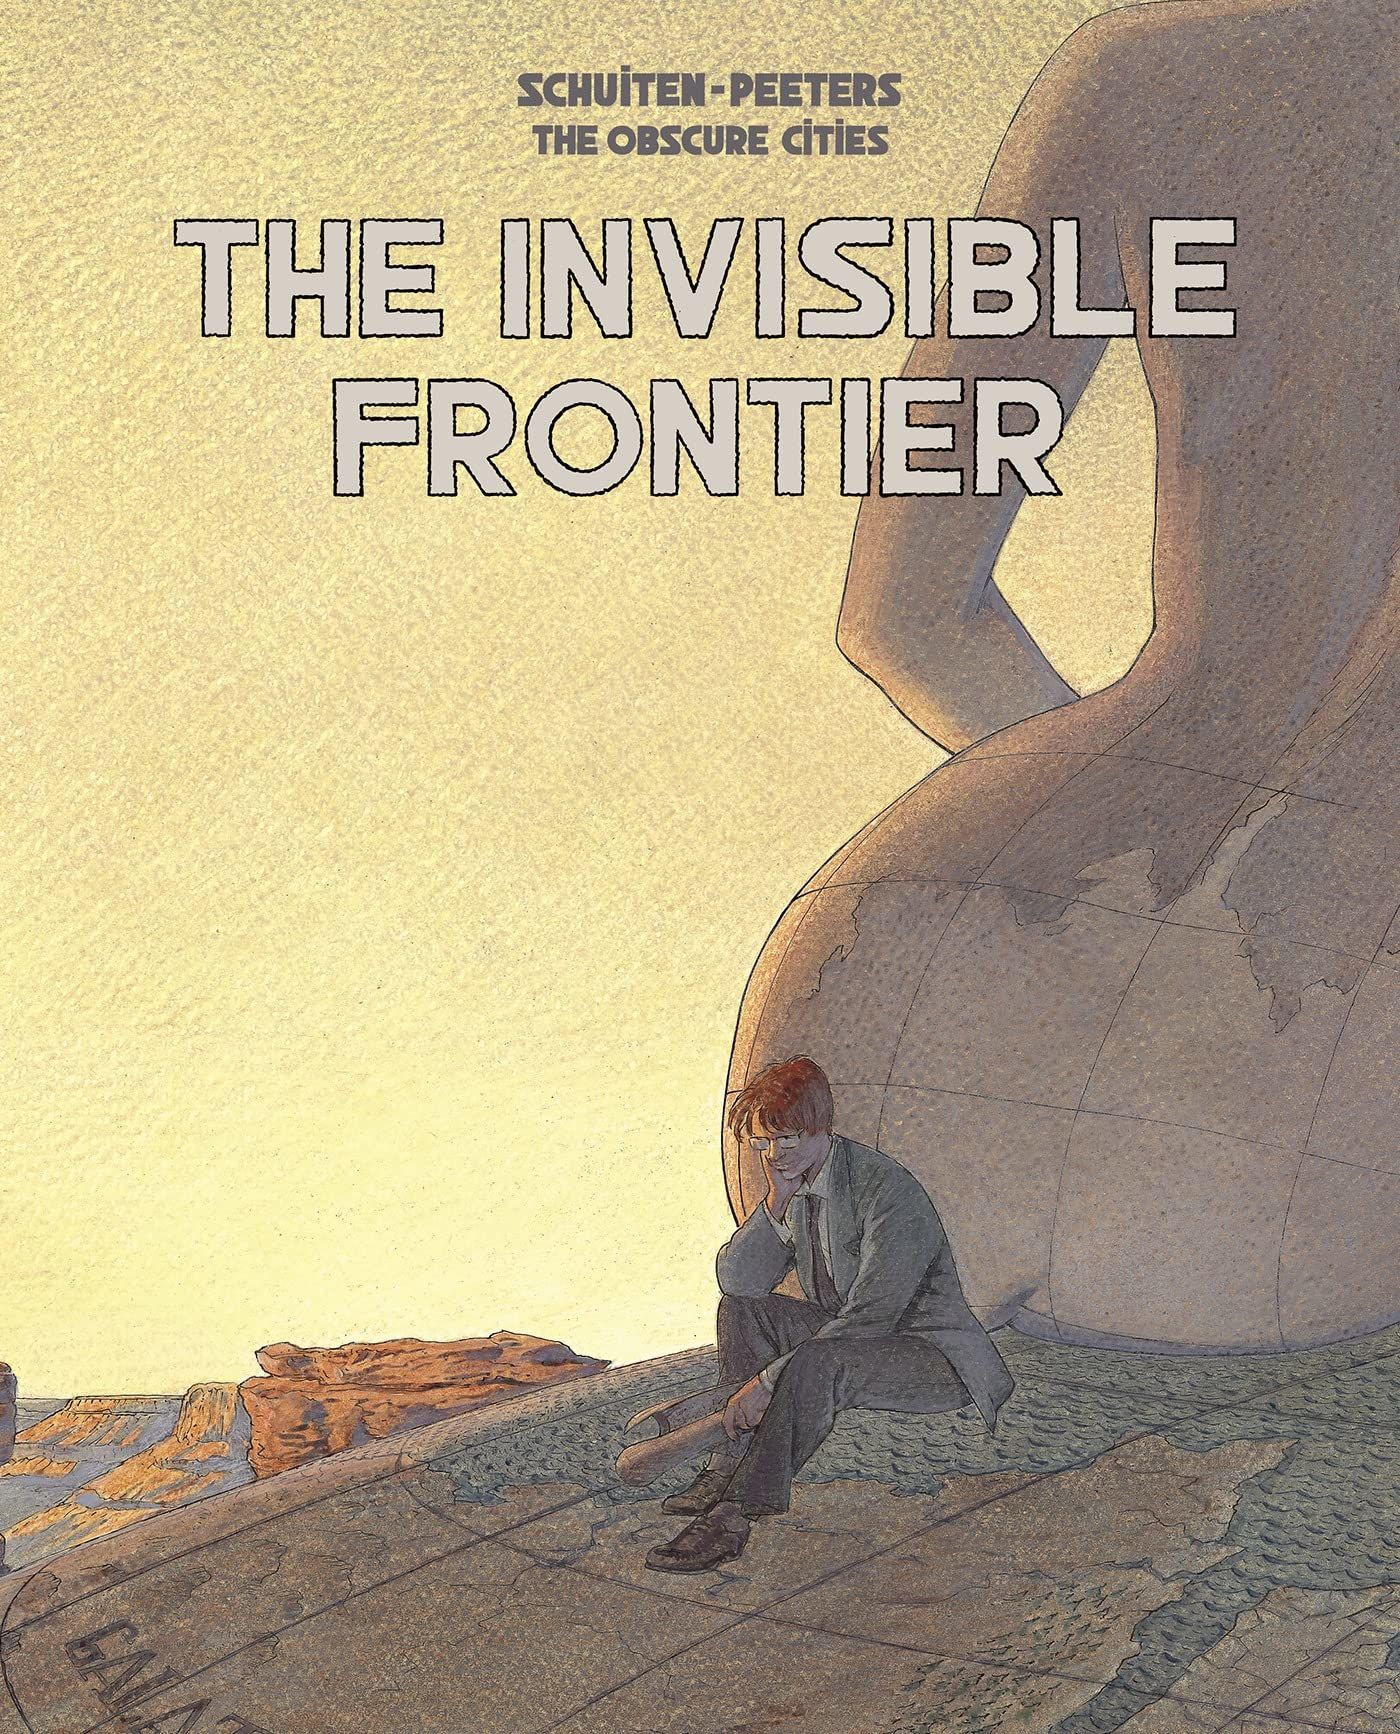 The Invisible Frontier (Obscure Cities)